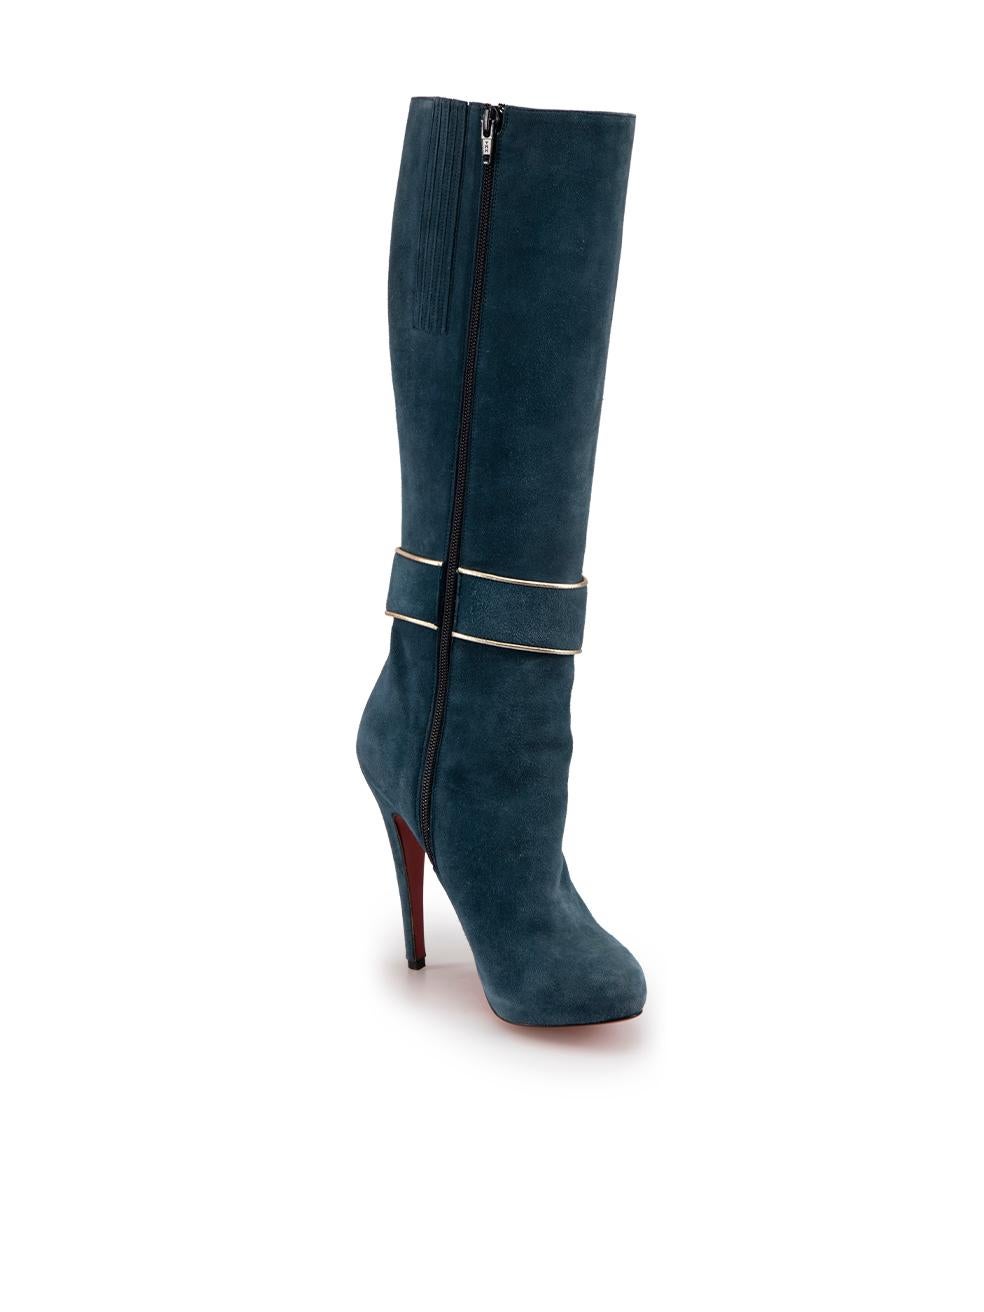 CONDITION is Good. Minor wear to boots is evident. Light wear to uppers with spots of mild abrasion found throughout. Hardly any wear to outsoles seen on this used Christian Louboutin designer resale item.

Details
Teal
Suede
Knee high boots
Almond